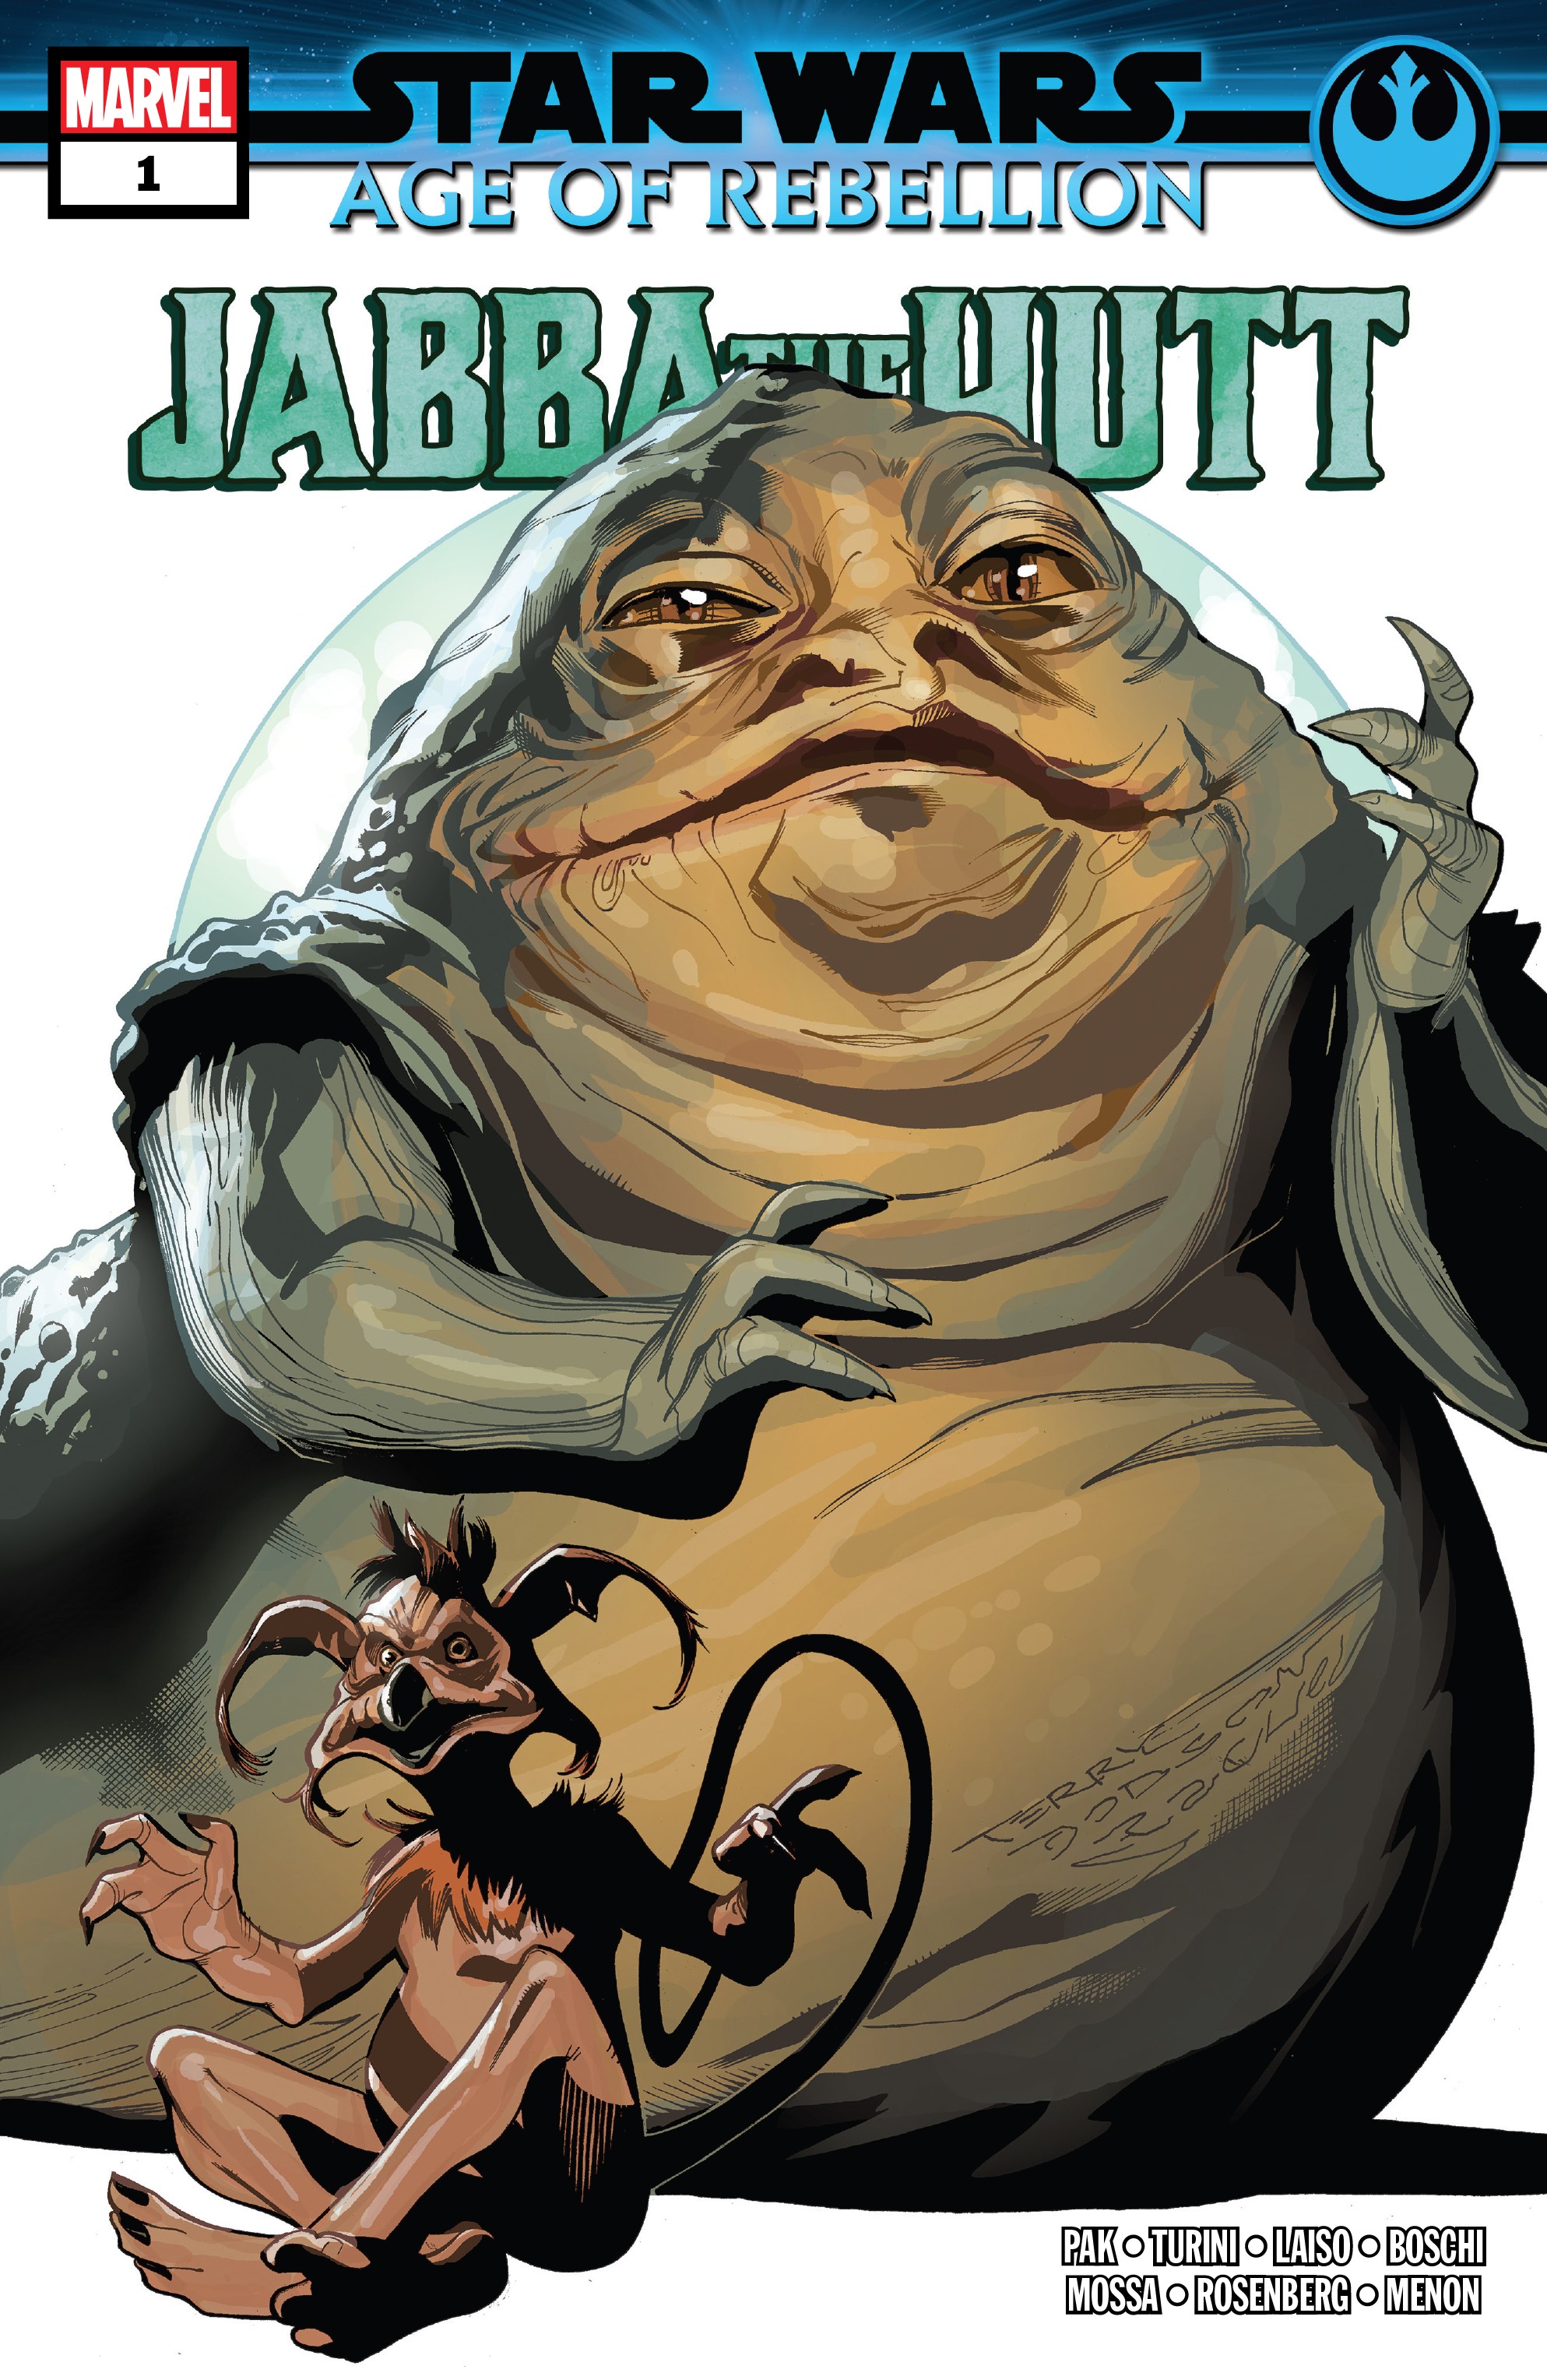 Read online Star Wars: Age Of Rebellion comic -  Issue # Jabba The Hutt - 1